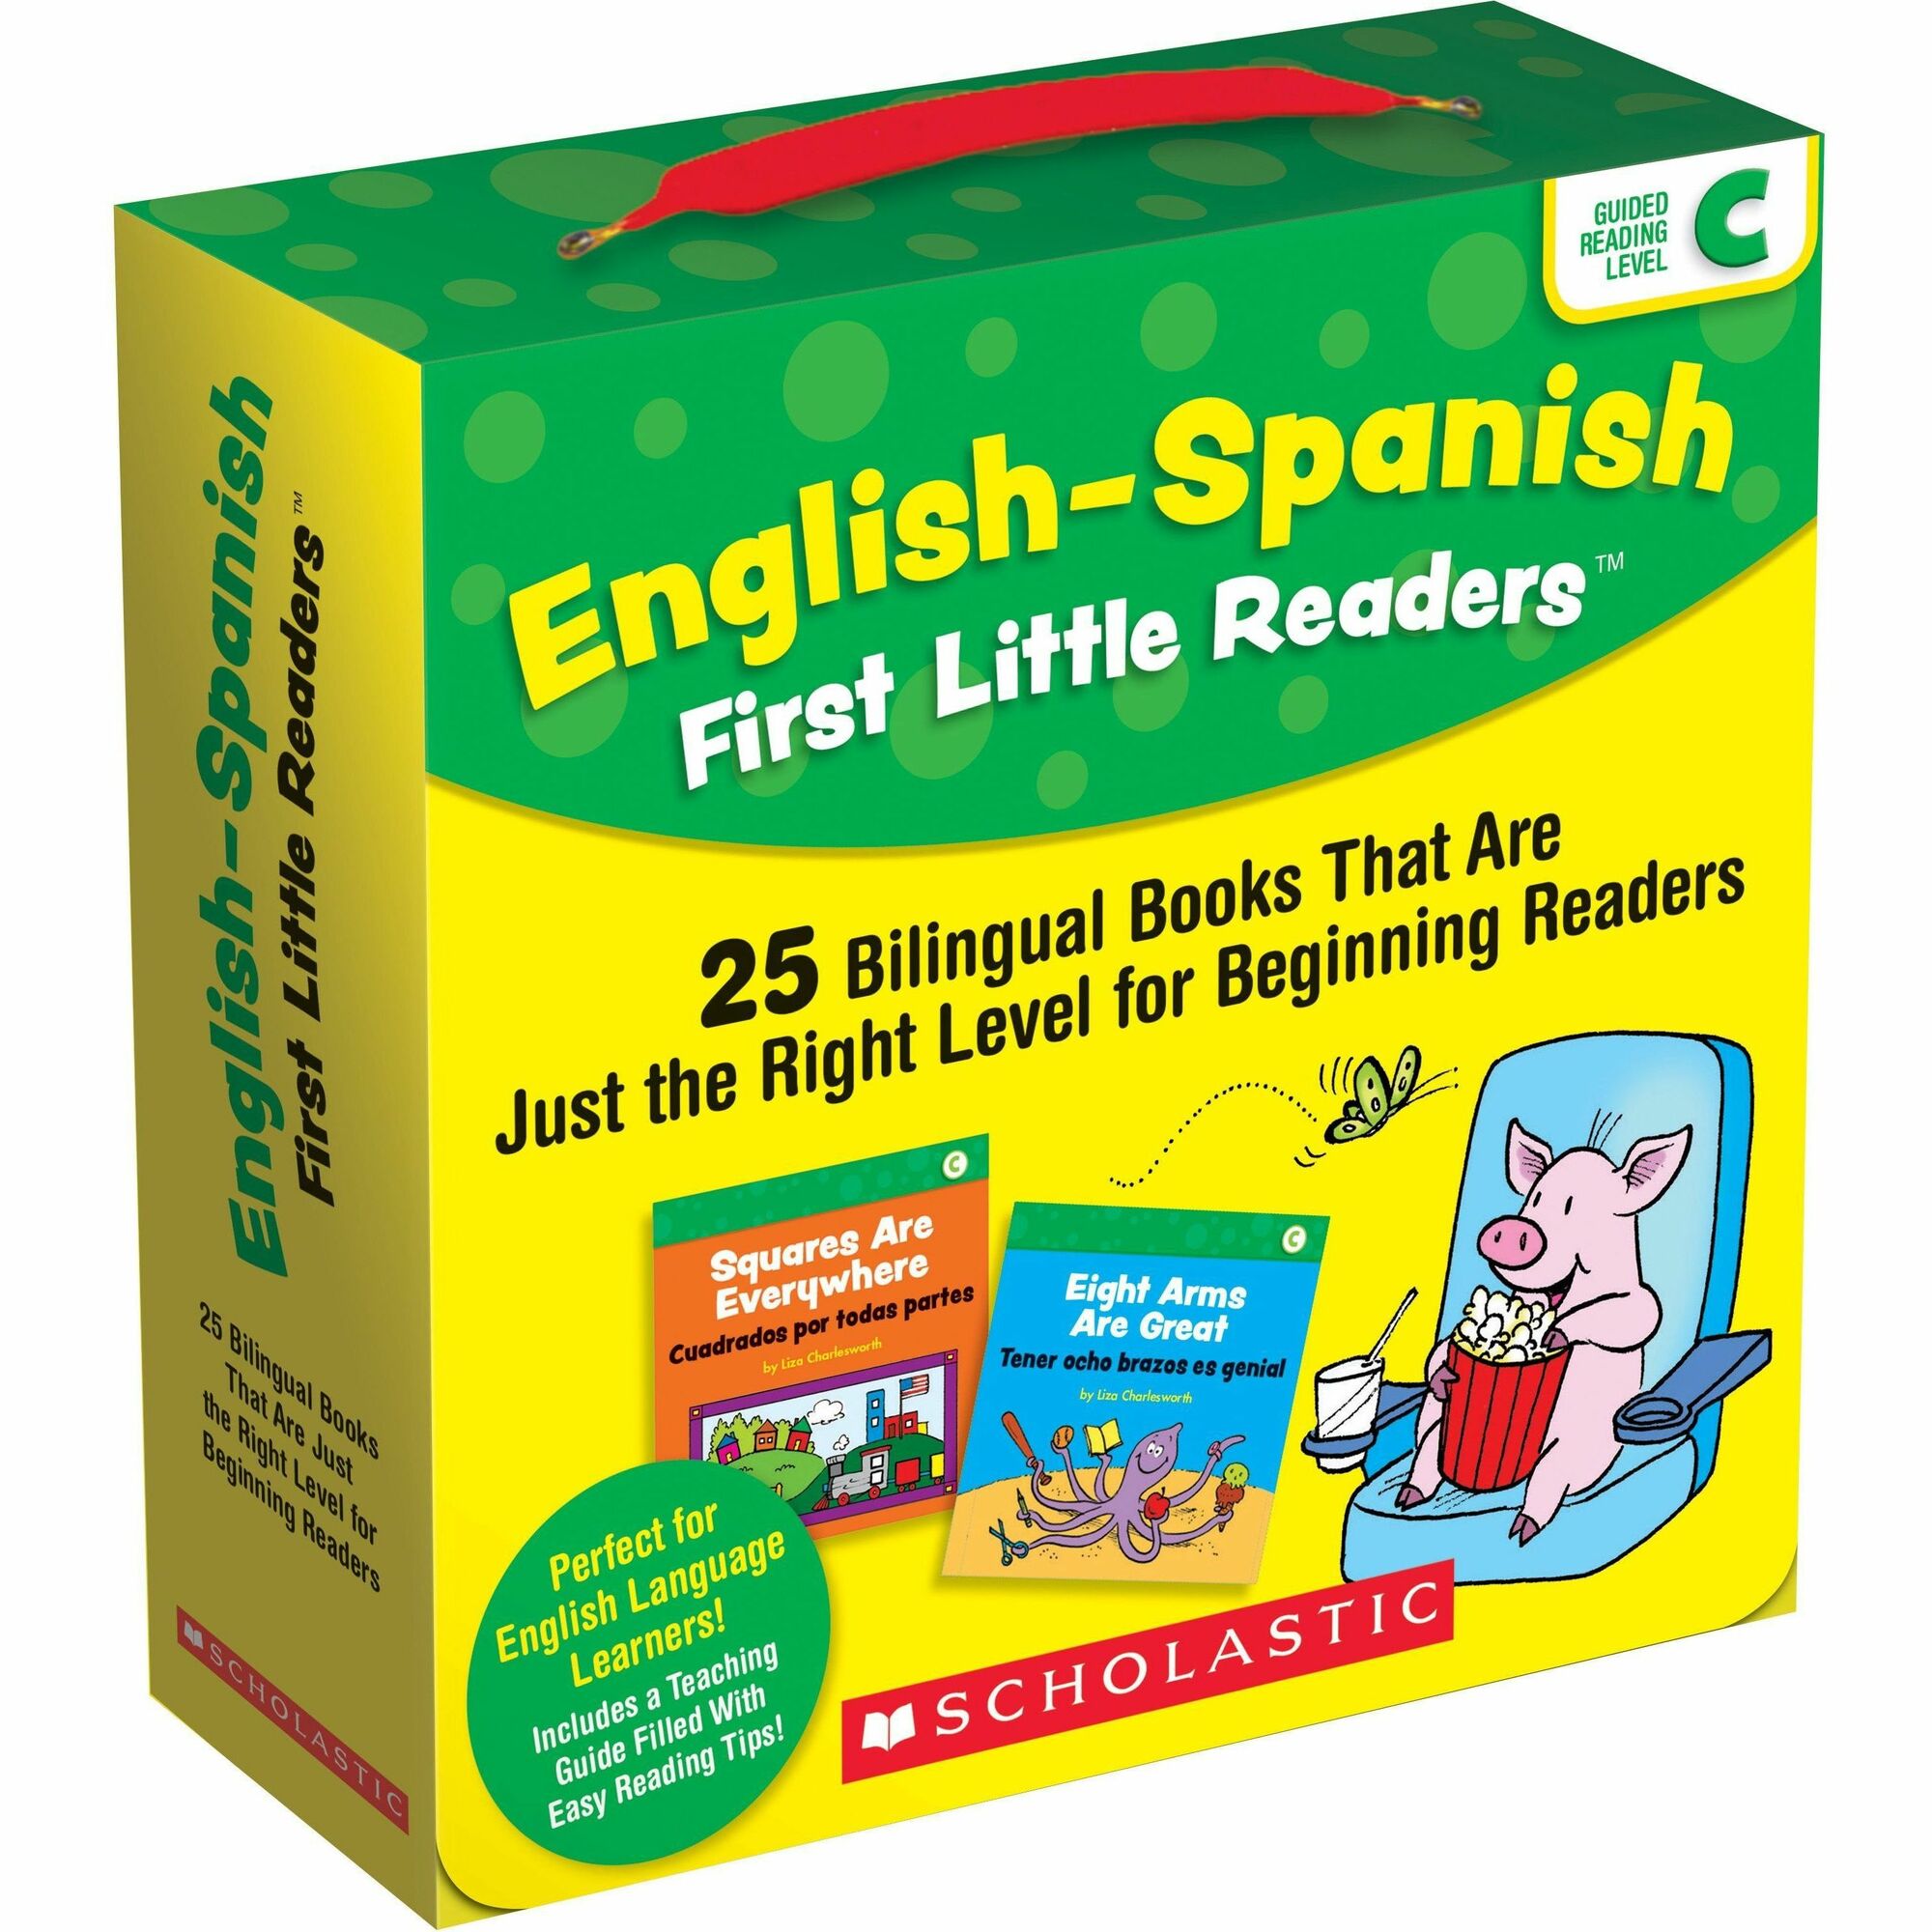 scholastic-first-little-readers-book-set-printed-book-by-liza-charlesworth-8-pages-scholastic-teaching-resources-publication-july-1-2020-book-grade-preschool-2-english-spanish_shs1338662090 - 1